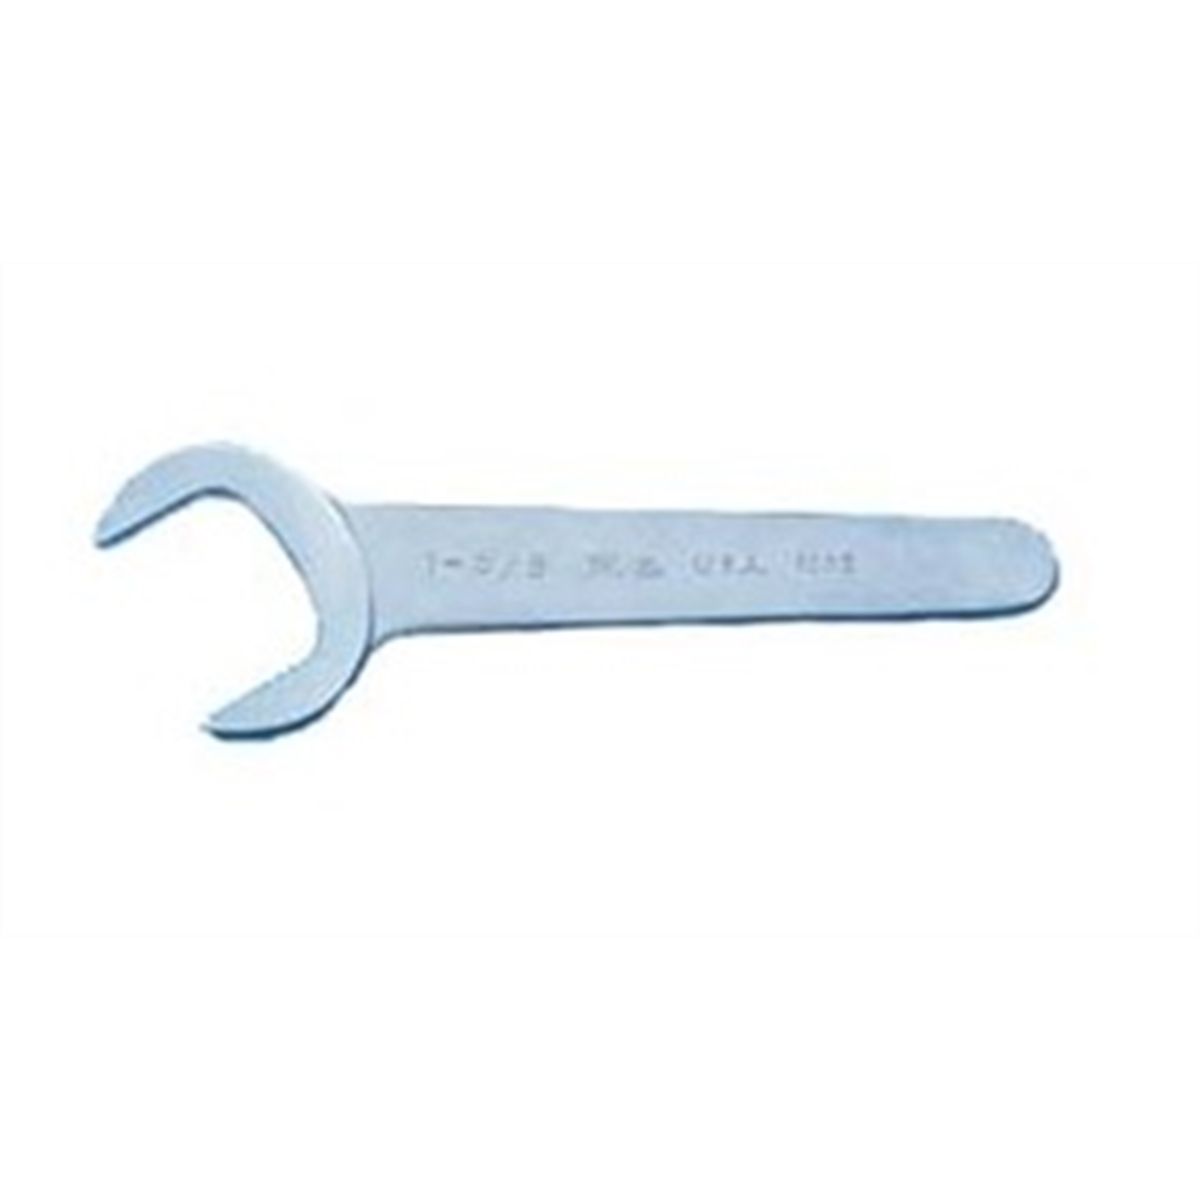 Chrome Service Wrench 30 Deg Angle - 1-1/2 In